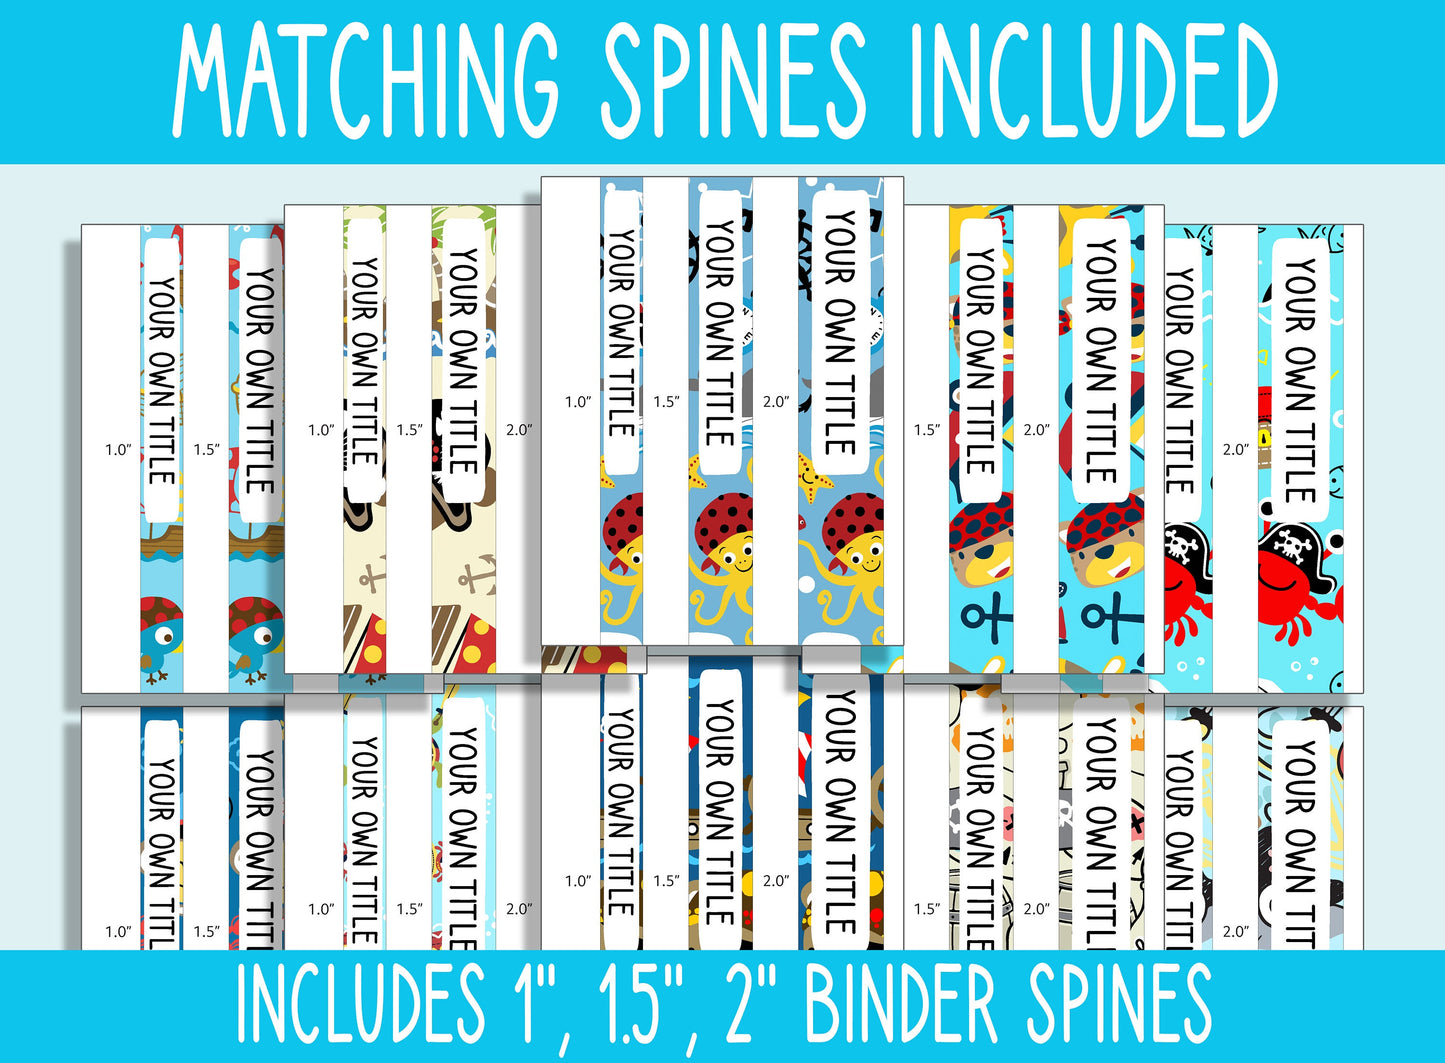 10 Editable Pirate Animals Binder Covers, Includes 1, 1.5, 2" Spines, Available in A4 & US Letter, Editing with PowerPoint or PDF Reader